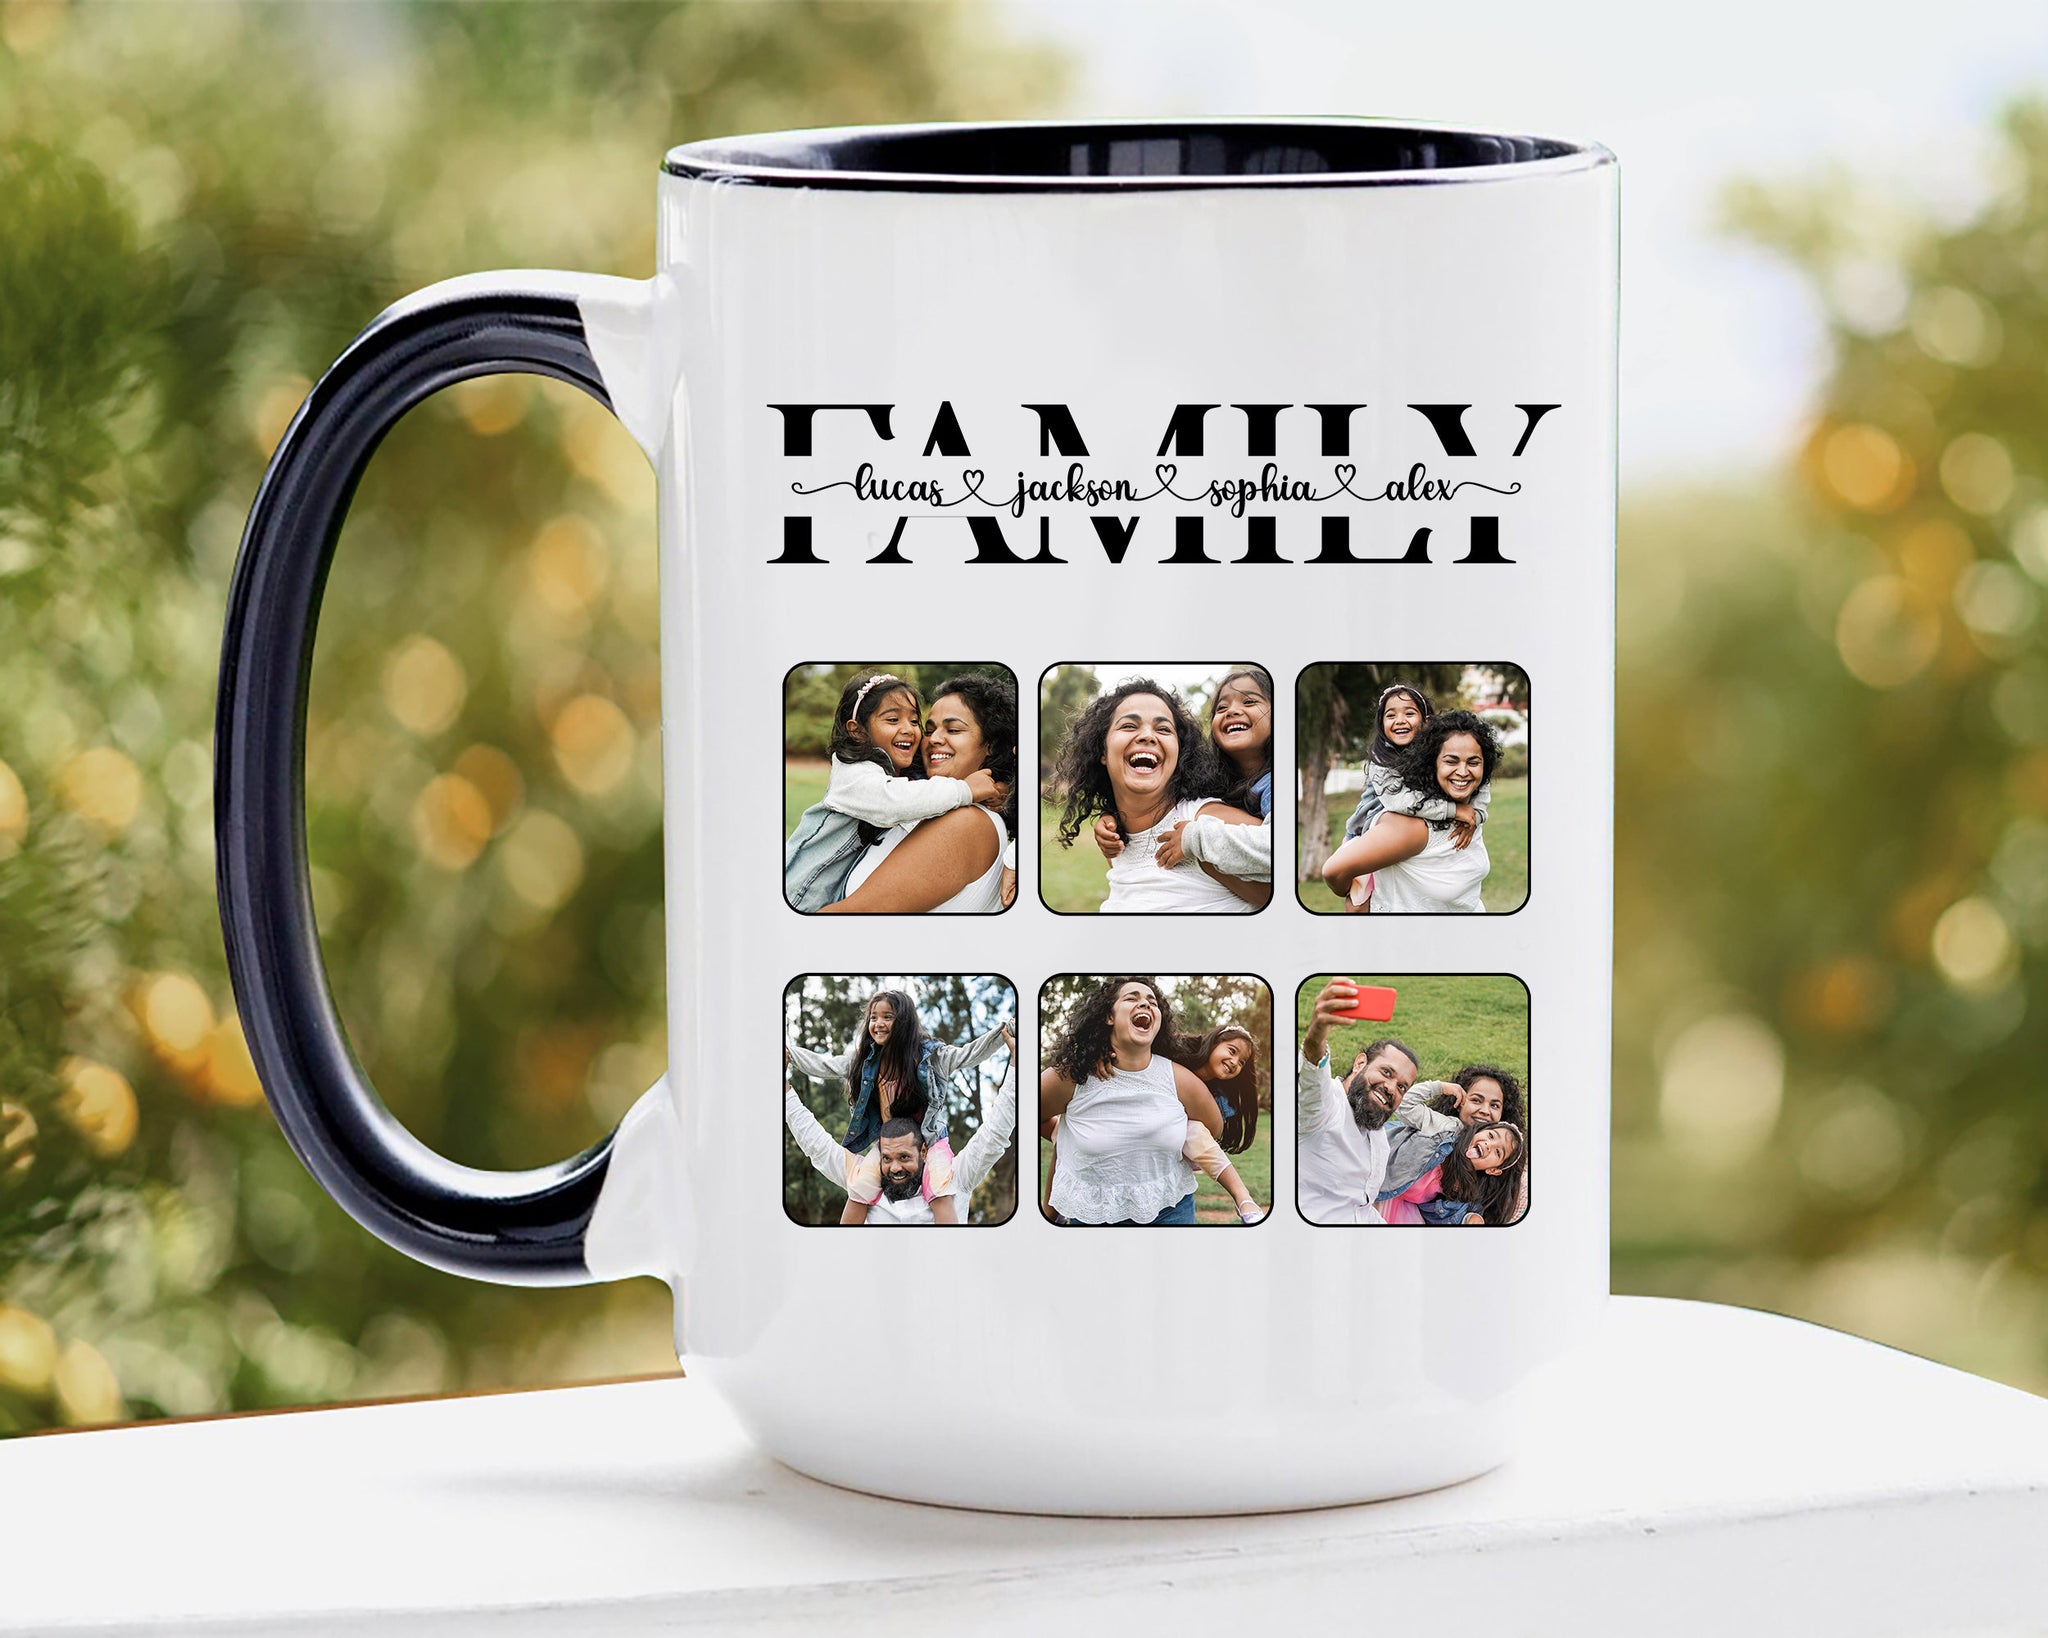 Personalized Family Mug, Mug with Photo, Custom Family Photo Coffee Mug, Custom Collage Photo Coffee Cup, Gift for Dad, Mom, Family Gift